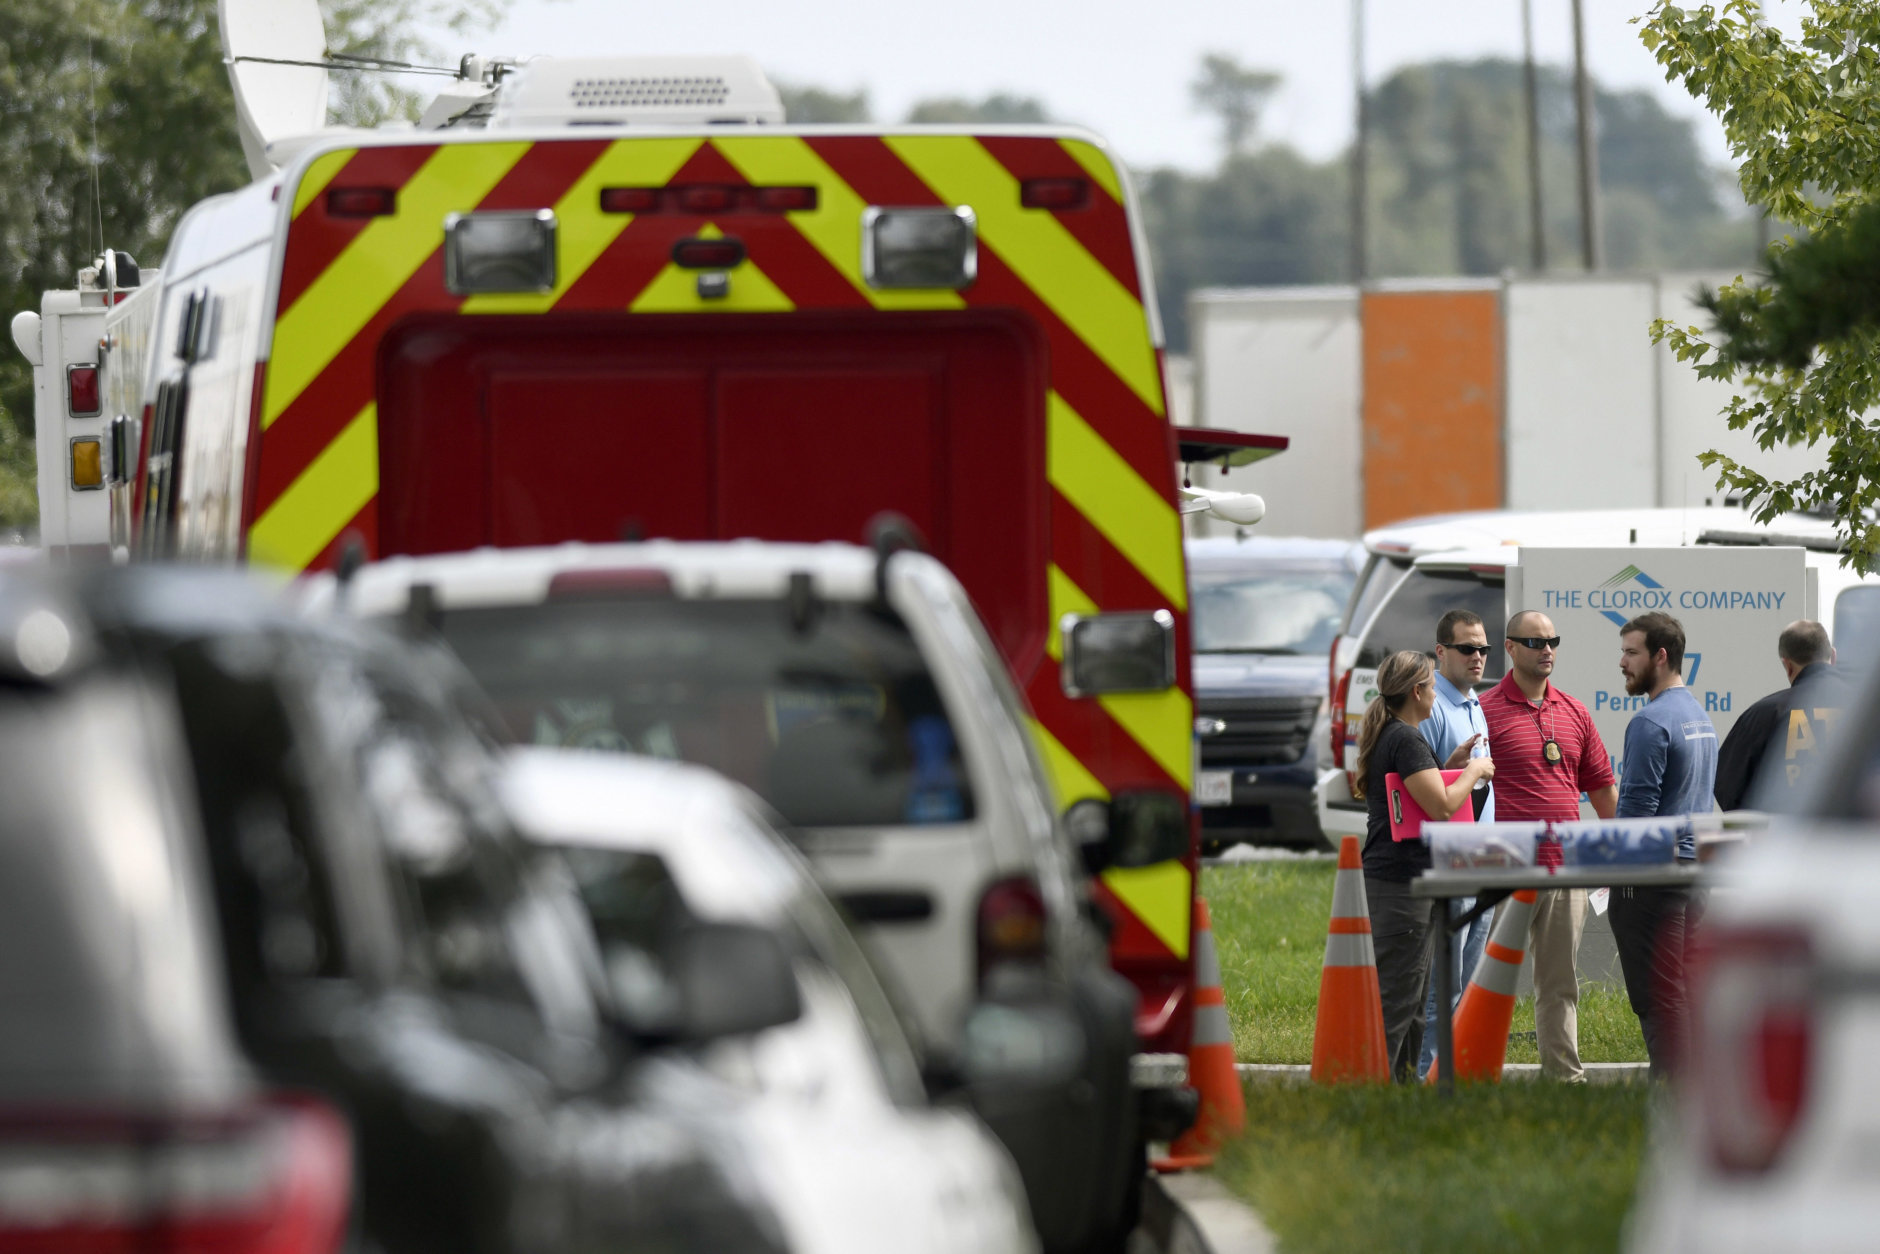 Law enforcement officials gather near the scene where a shooting took place in Aberdeen, Md., on Thursday, Sept. 20, 2018. (AP Photo/Steve Ruark)